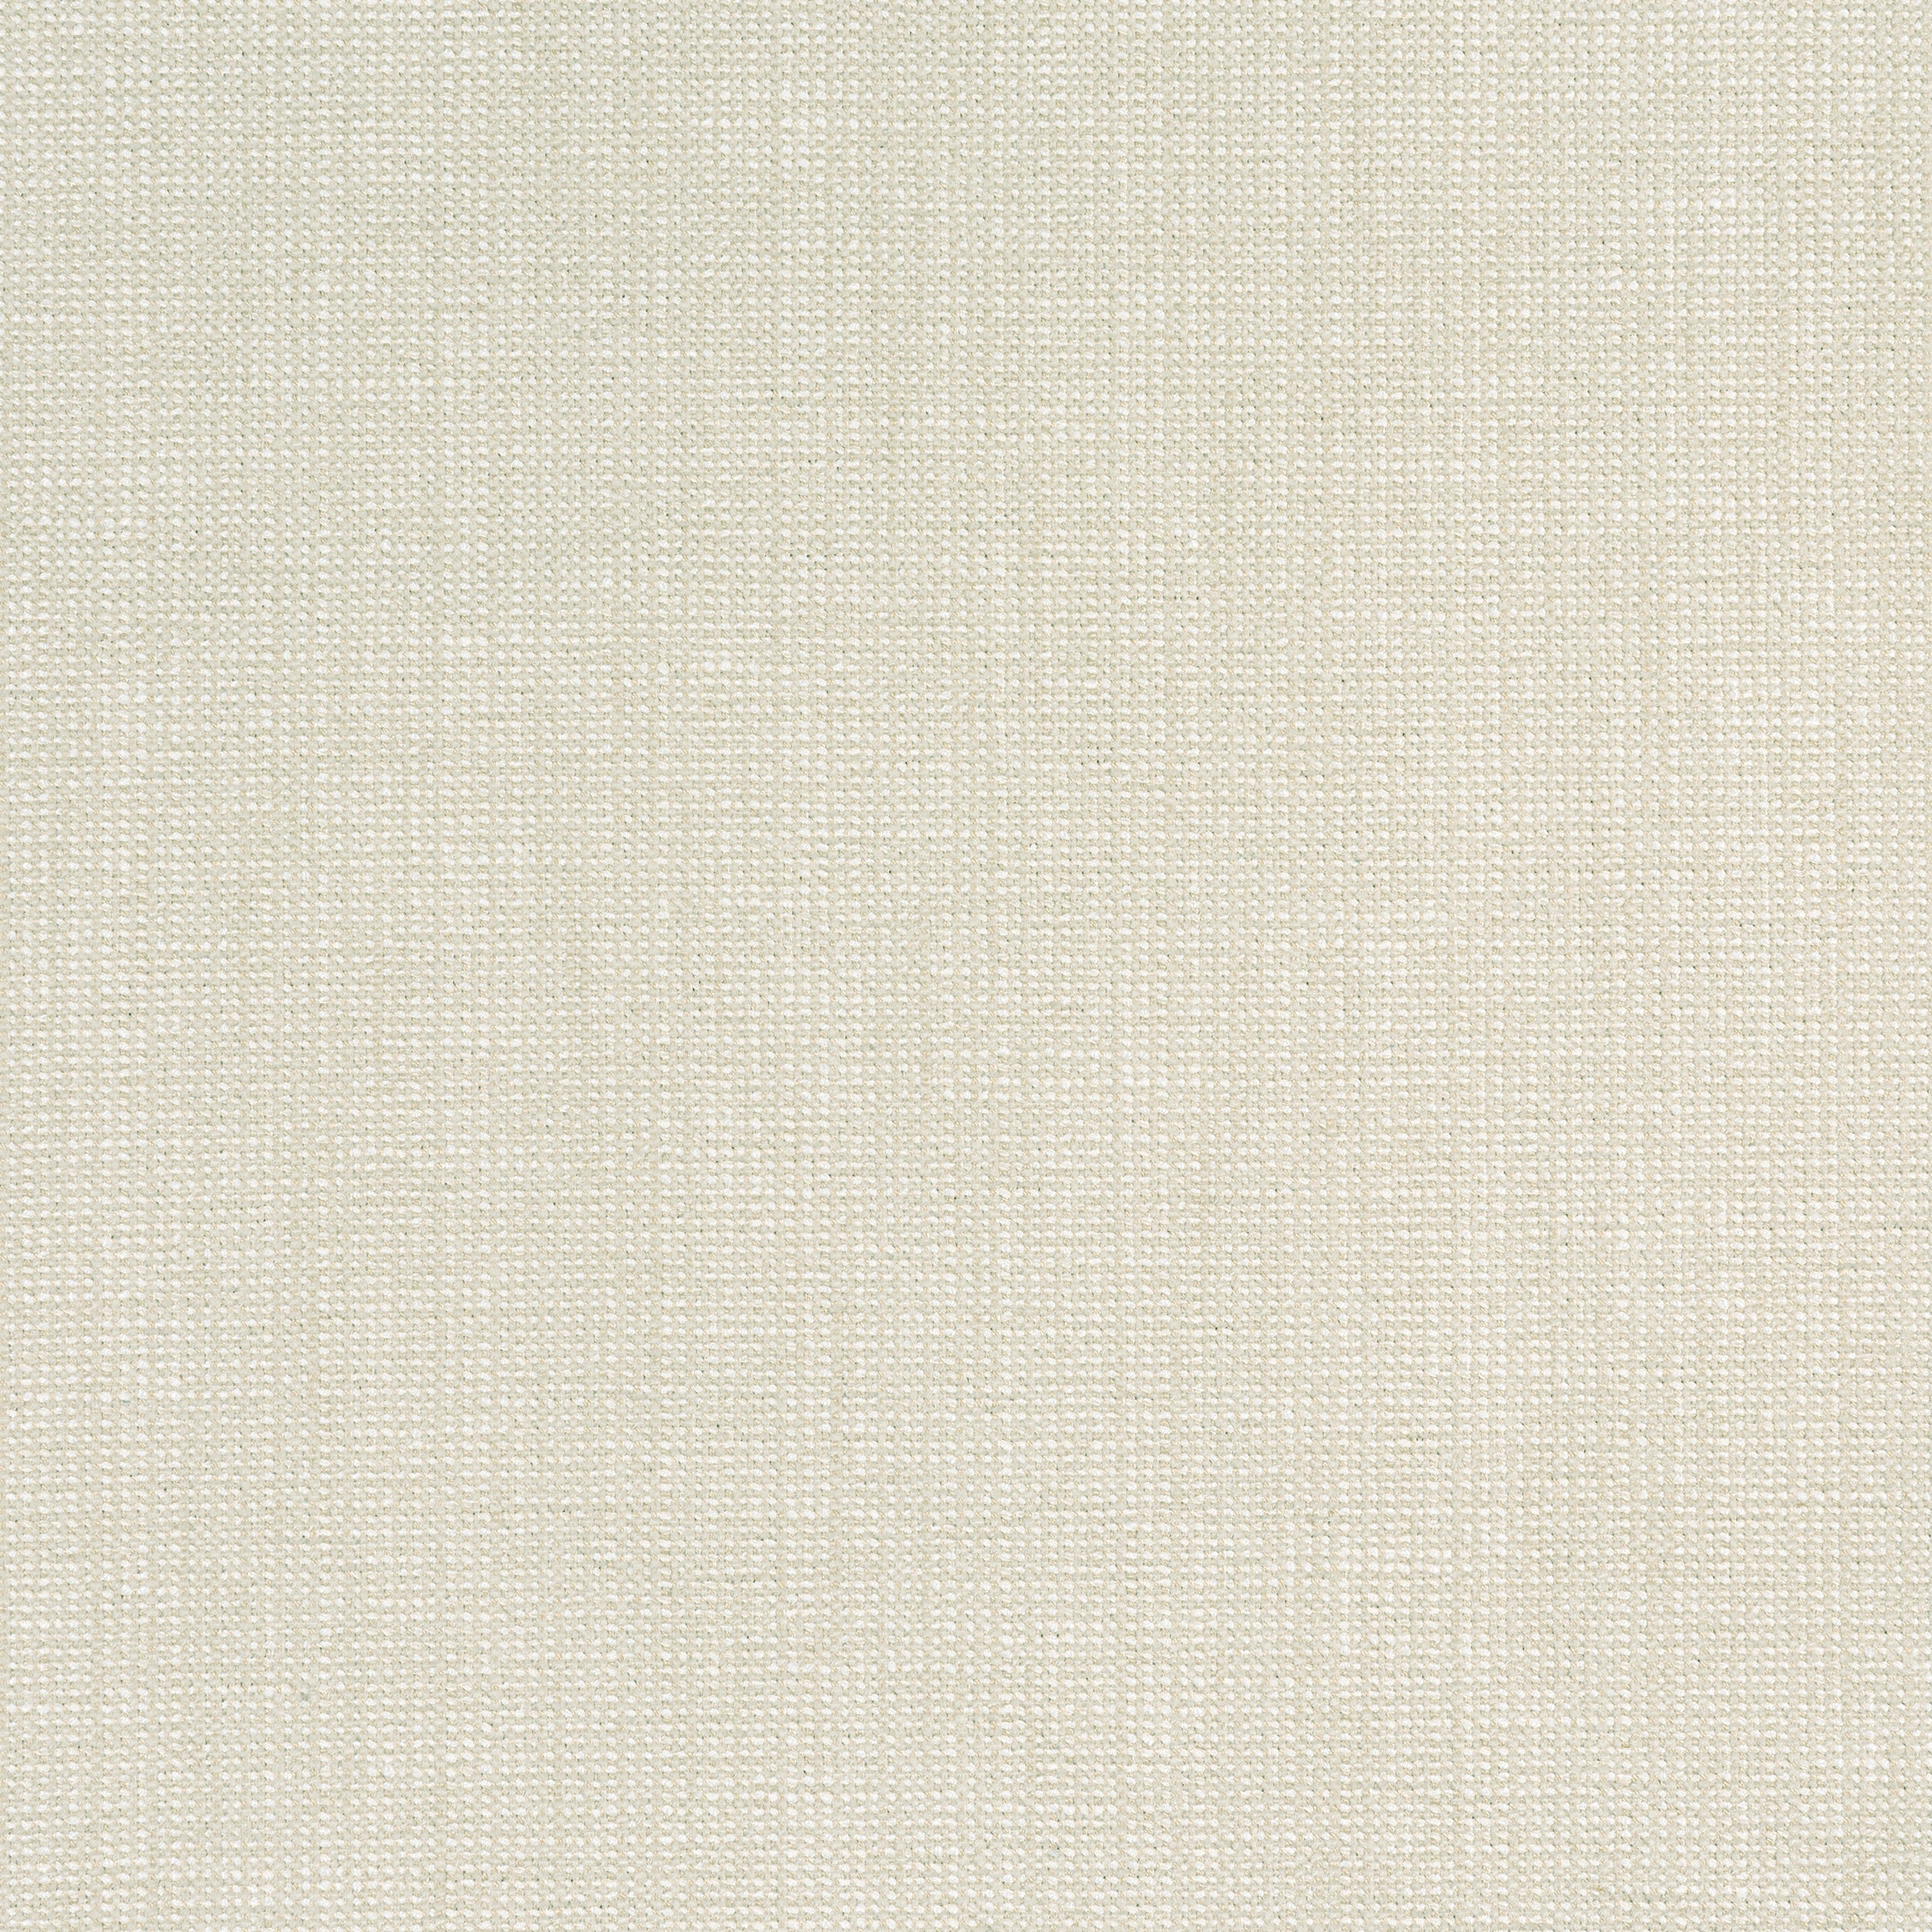 Sacchi fabric in flax color - pattern number W8754 - by Thibaut in the Haven Textures collection